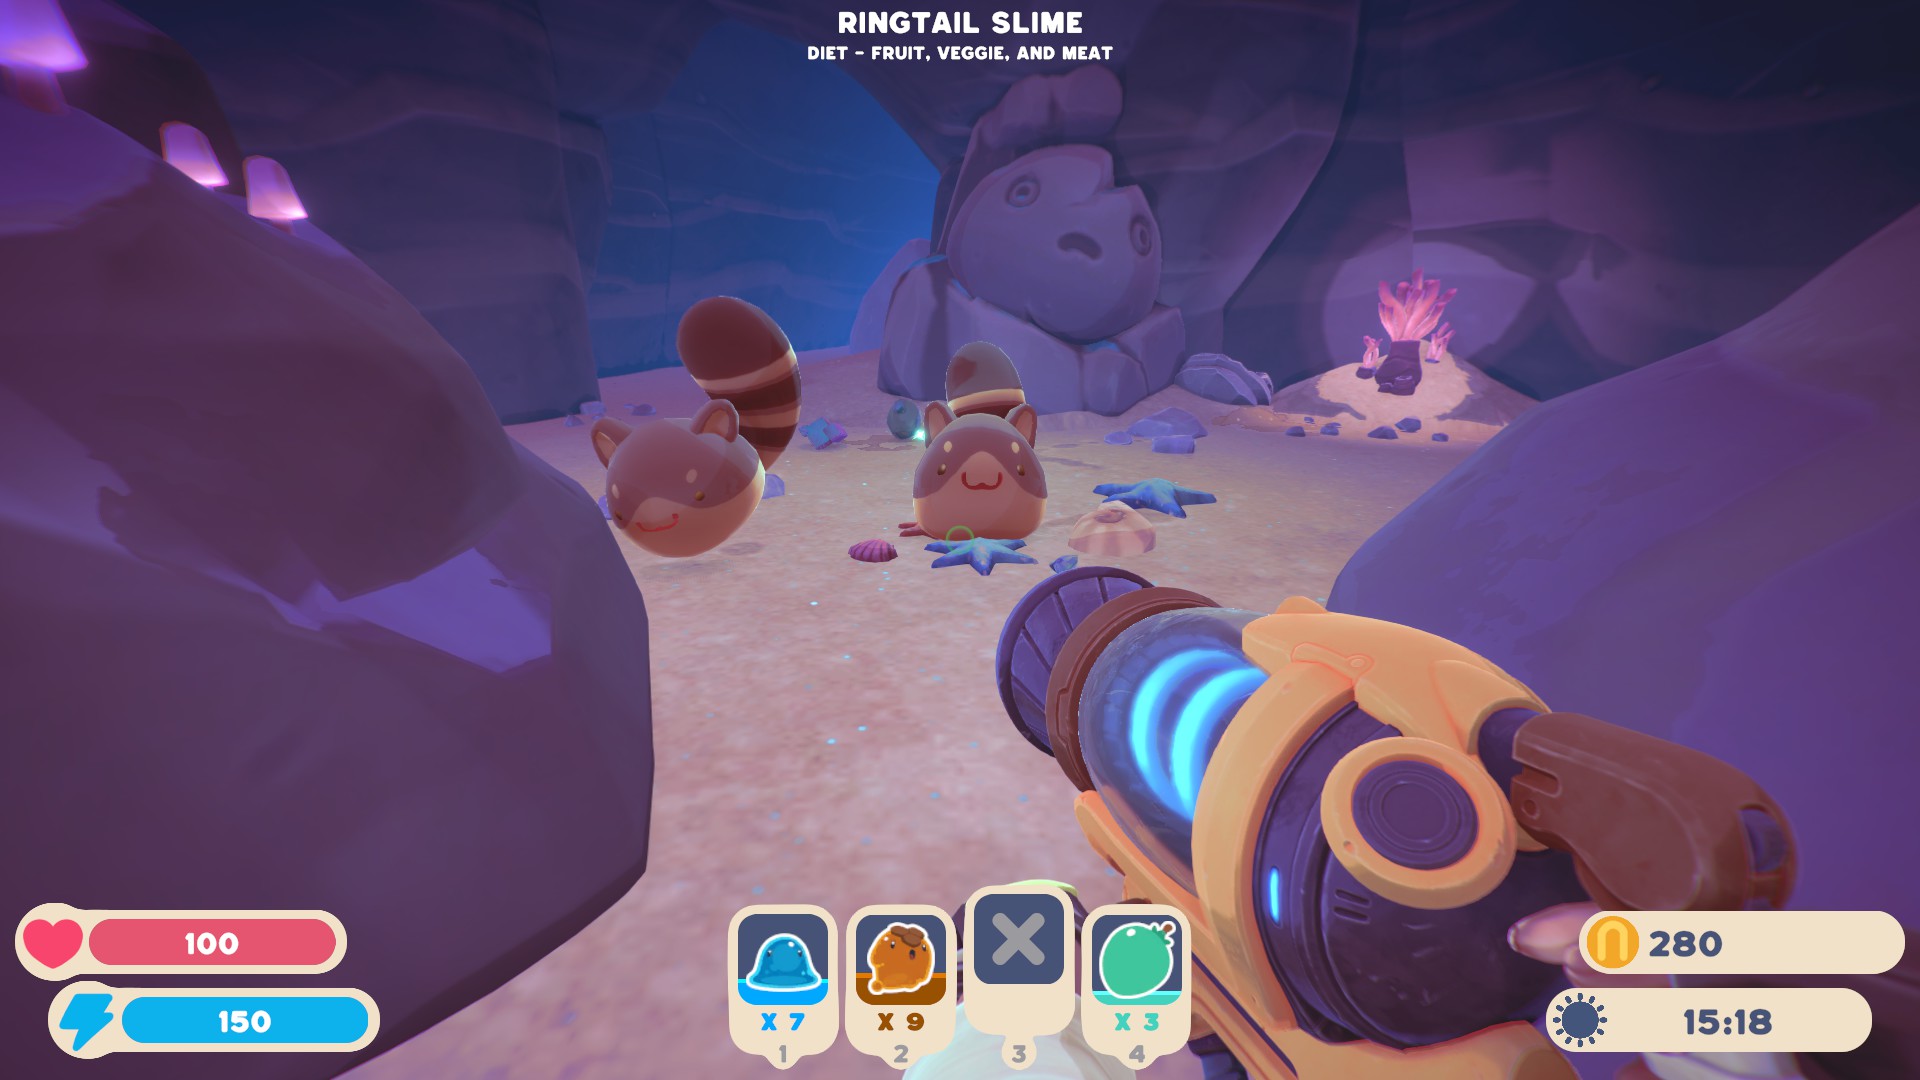 Slime Rancher 2 - All Species Full Guide - Ringtail Slime - F214D32